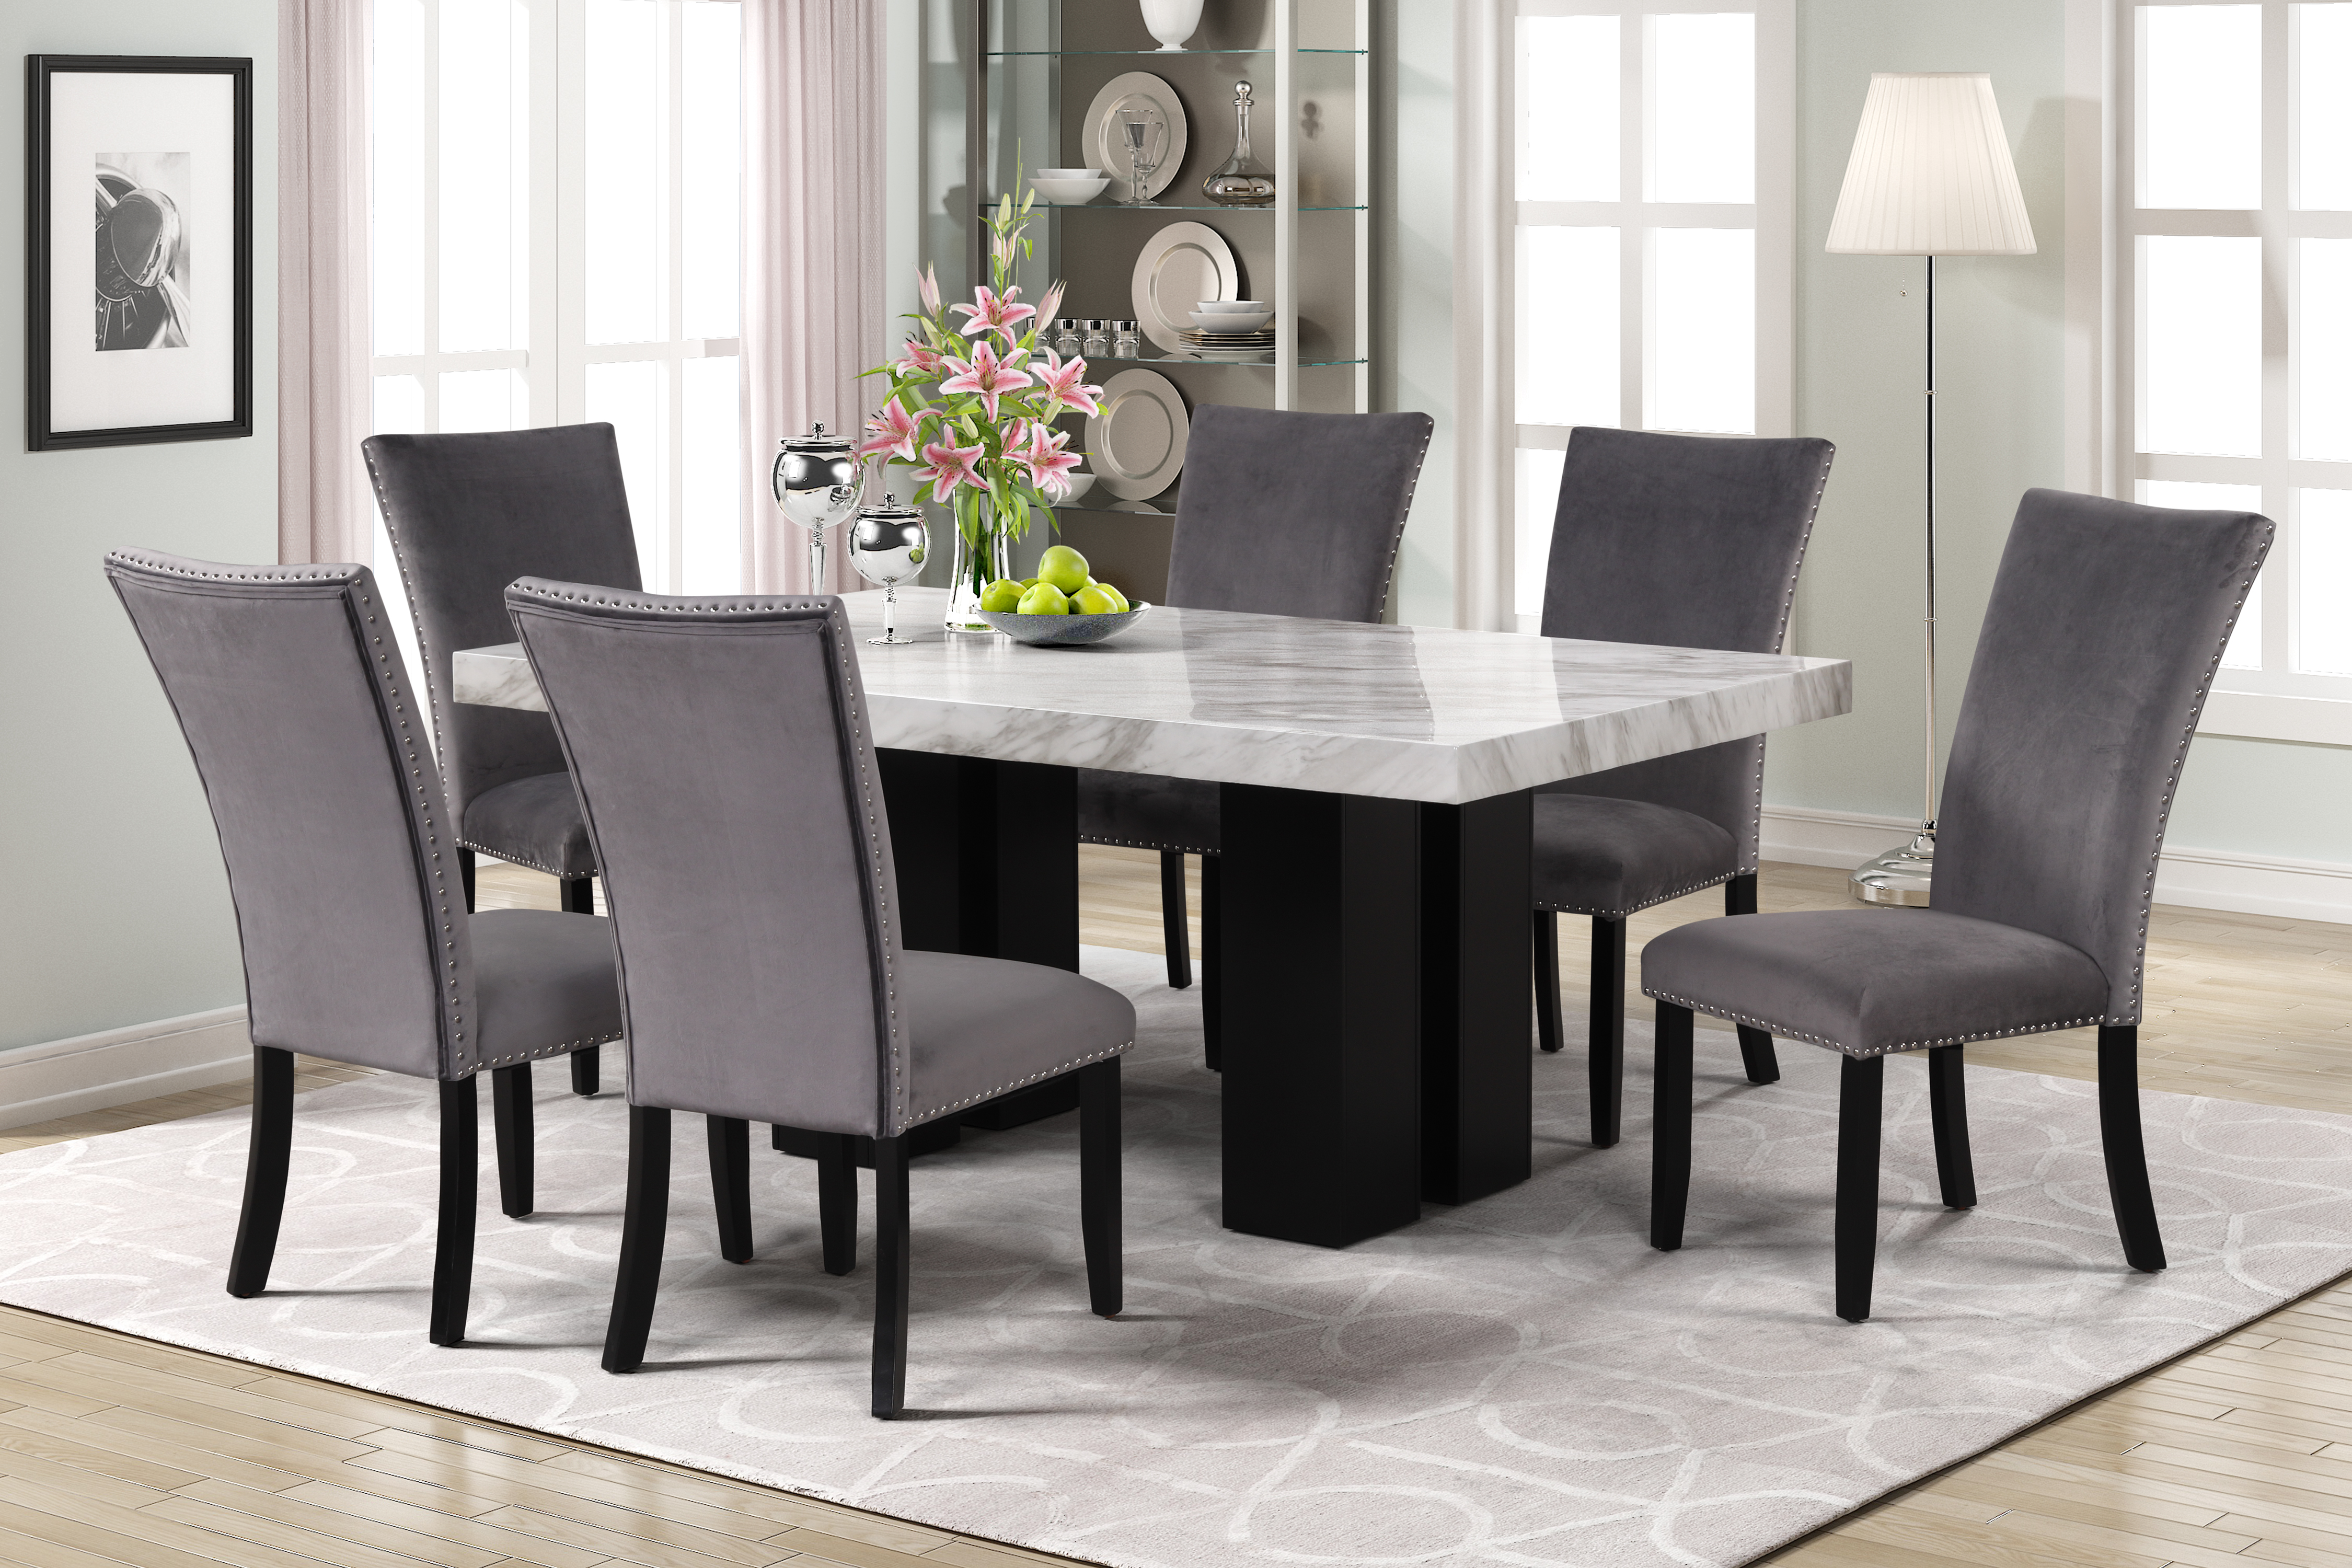 7-piece Dining Table Set with 1 Faux Marble Dining Rectangular Table and 6 Upholstered-Seat Chairs ,for Dining room and Living Room Furniture, Table Top:70in.Lx42in.Wx3in.H, Gray-Boyel Living